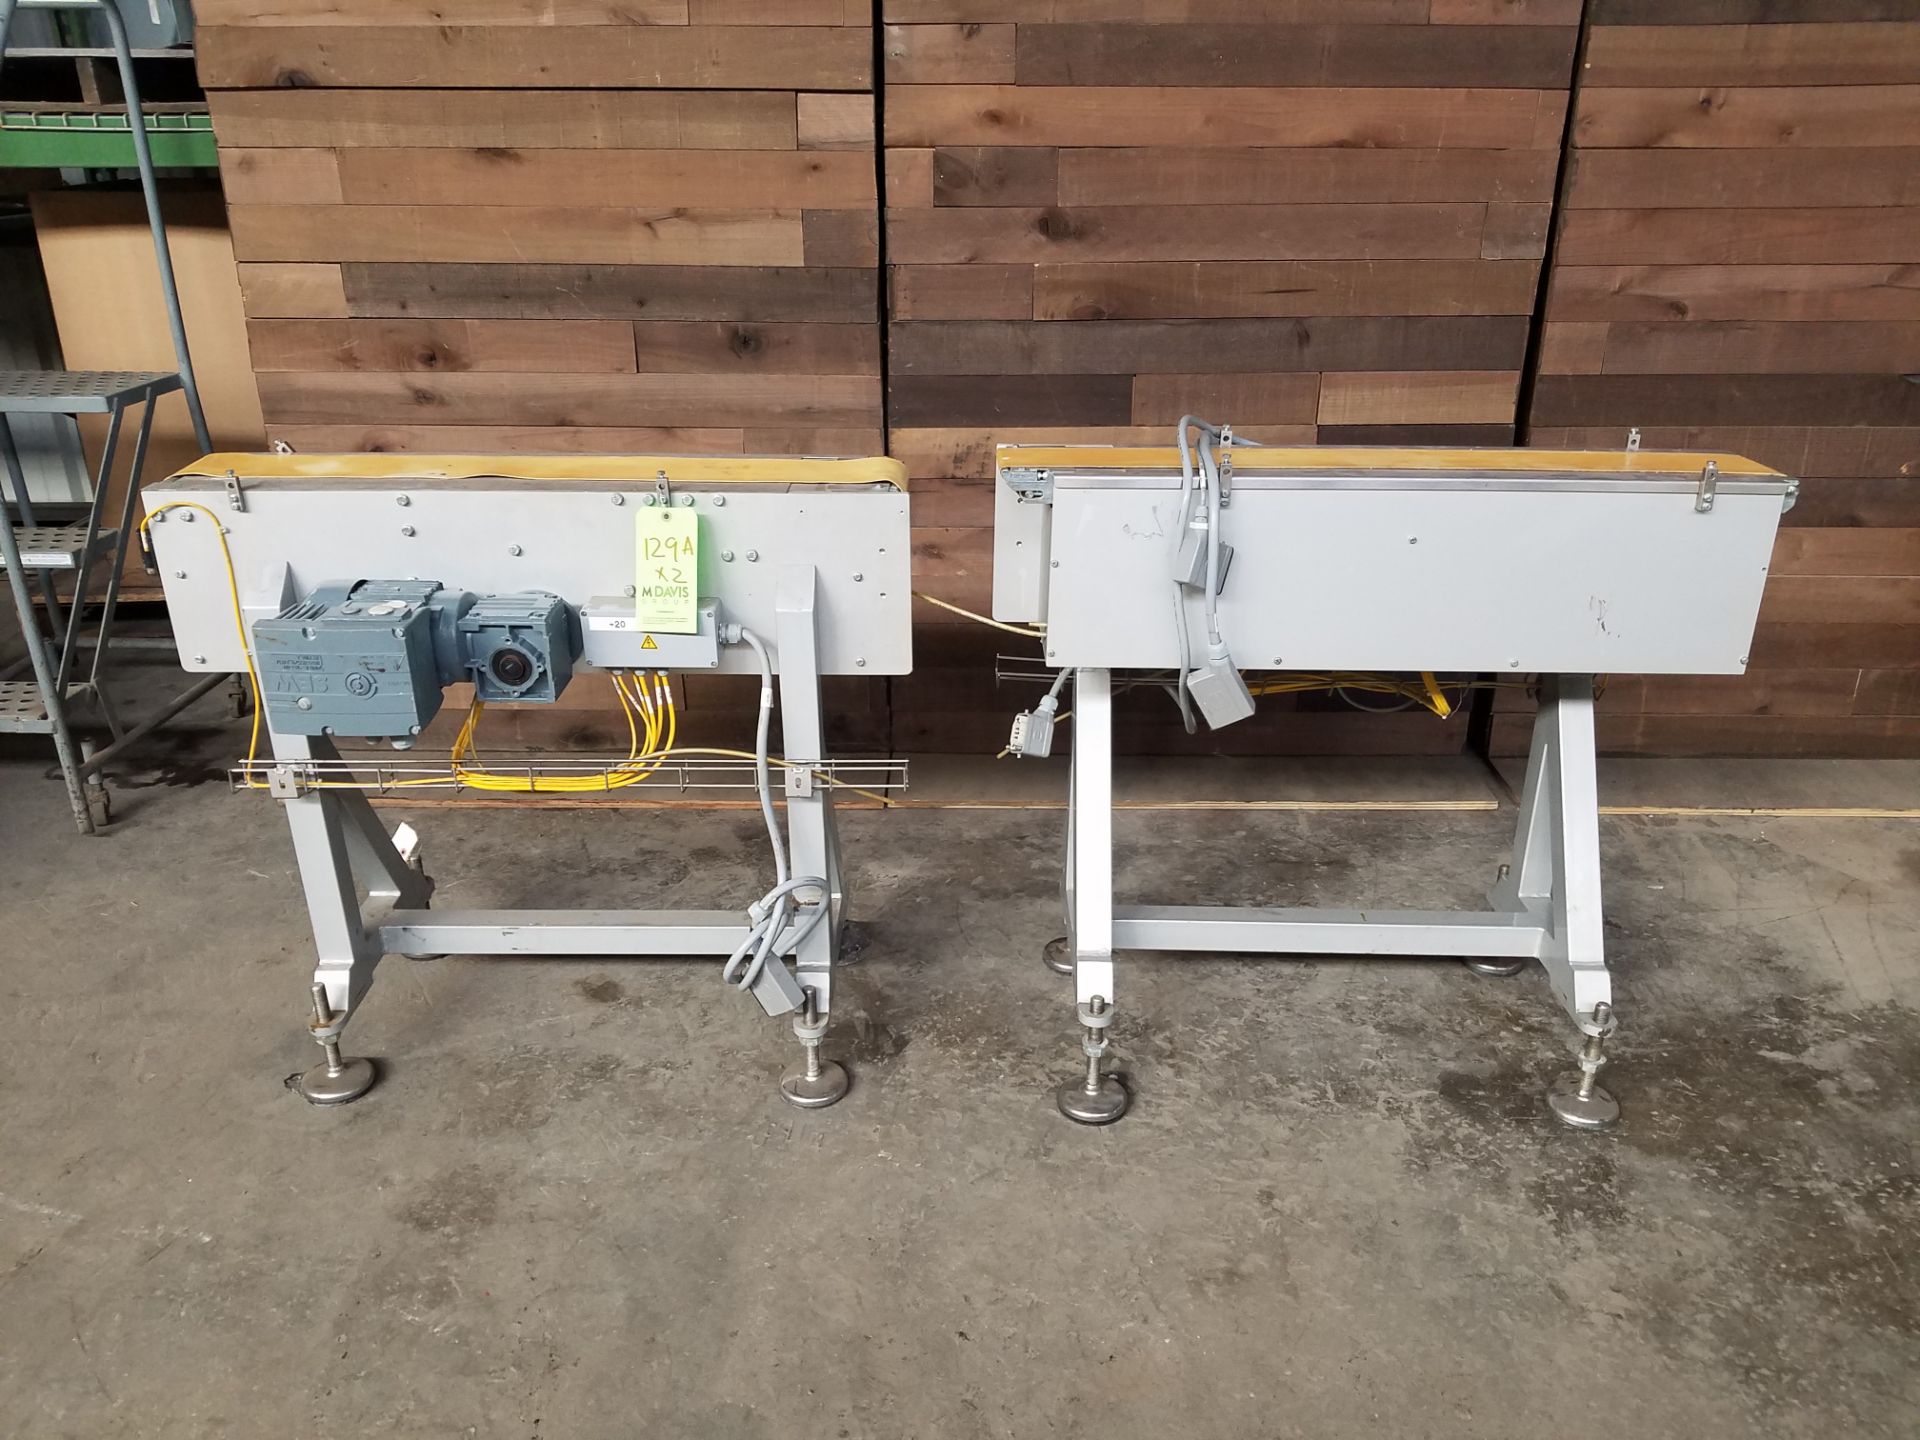 Two 5" wide x 40" long x 34" height belt conveyors (Handling, Loading & Site Management Fee: $25) - Image 5 of 5